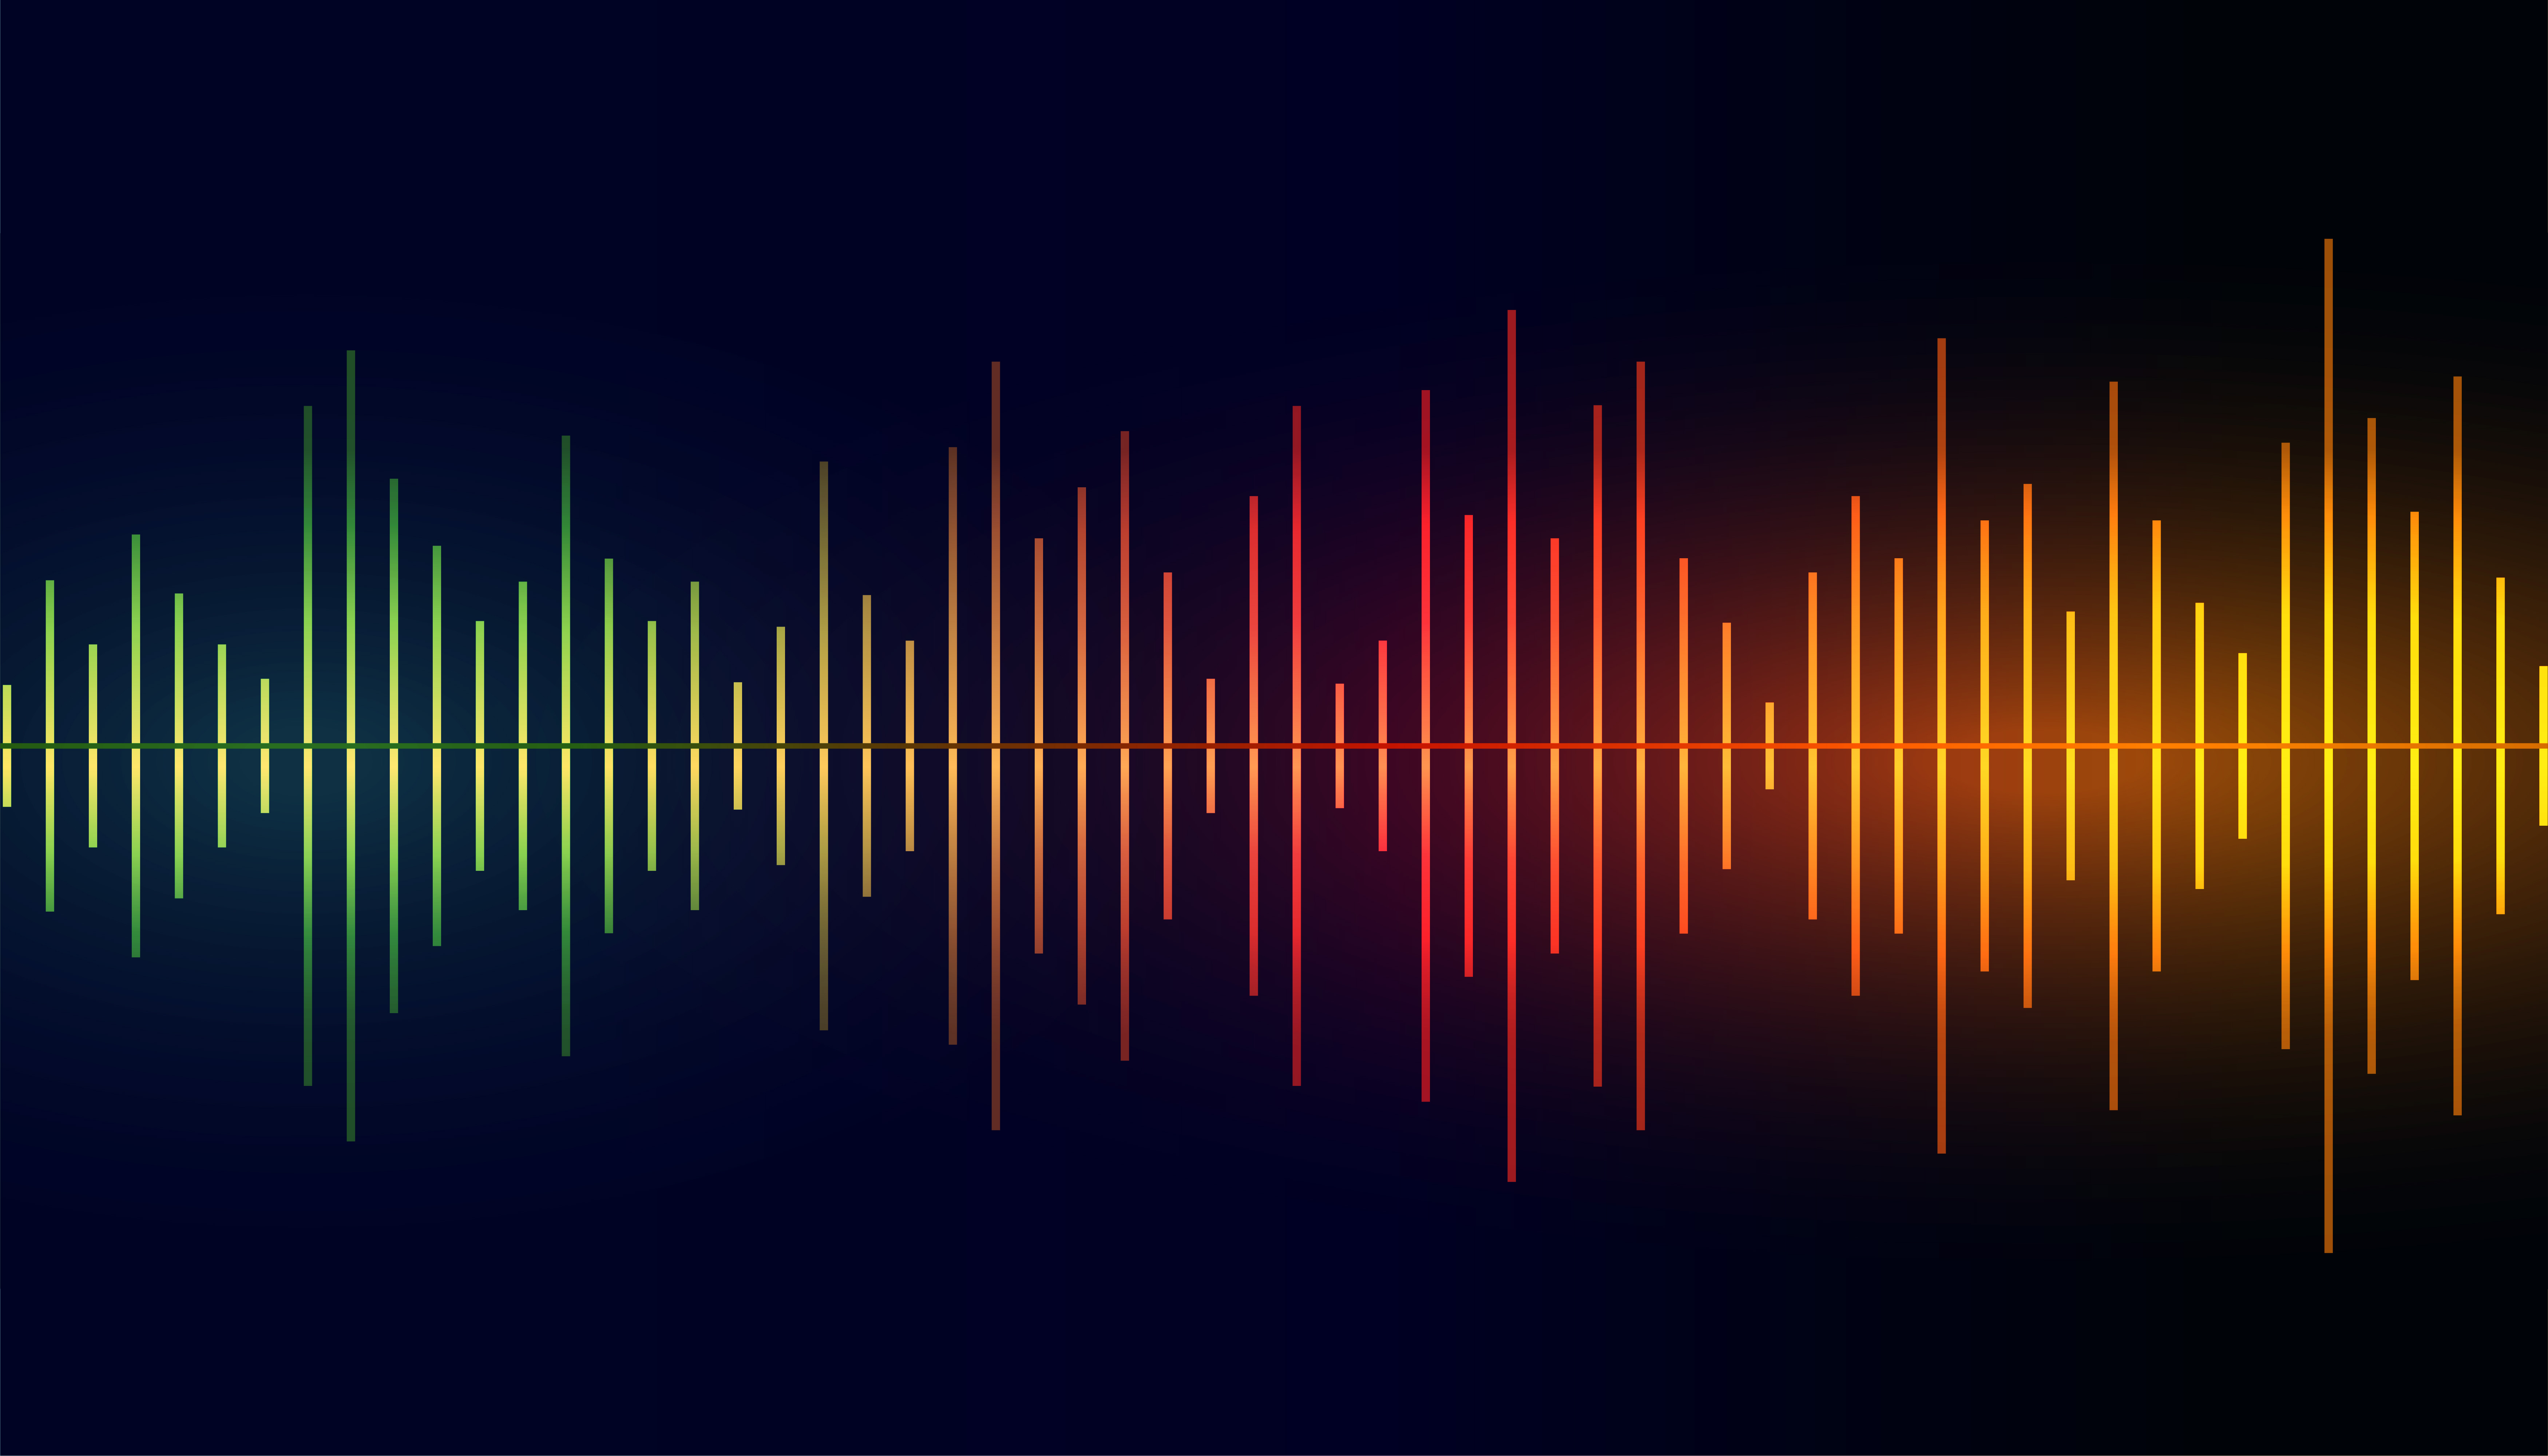 speech recognition Like A Pro With The Help Of These 5 Tips